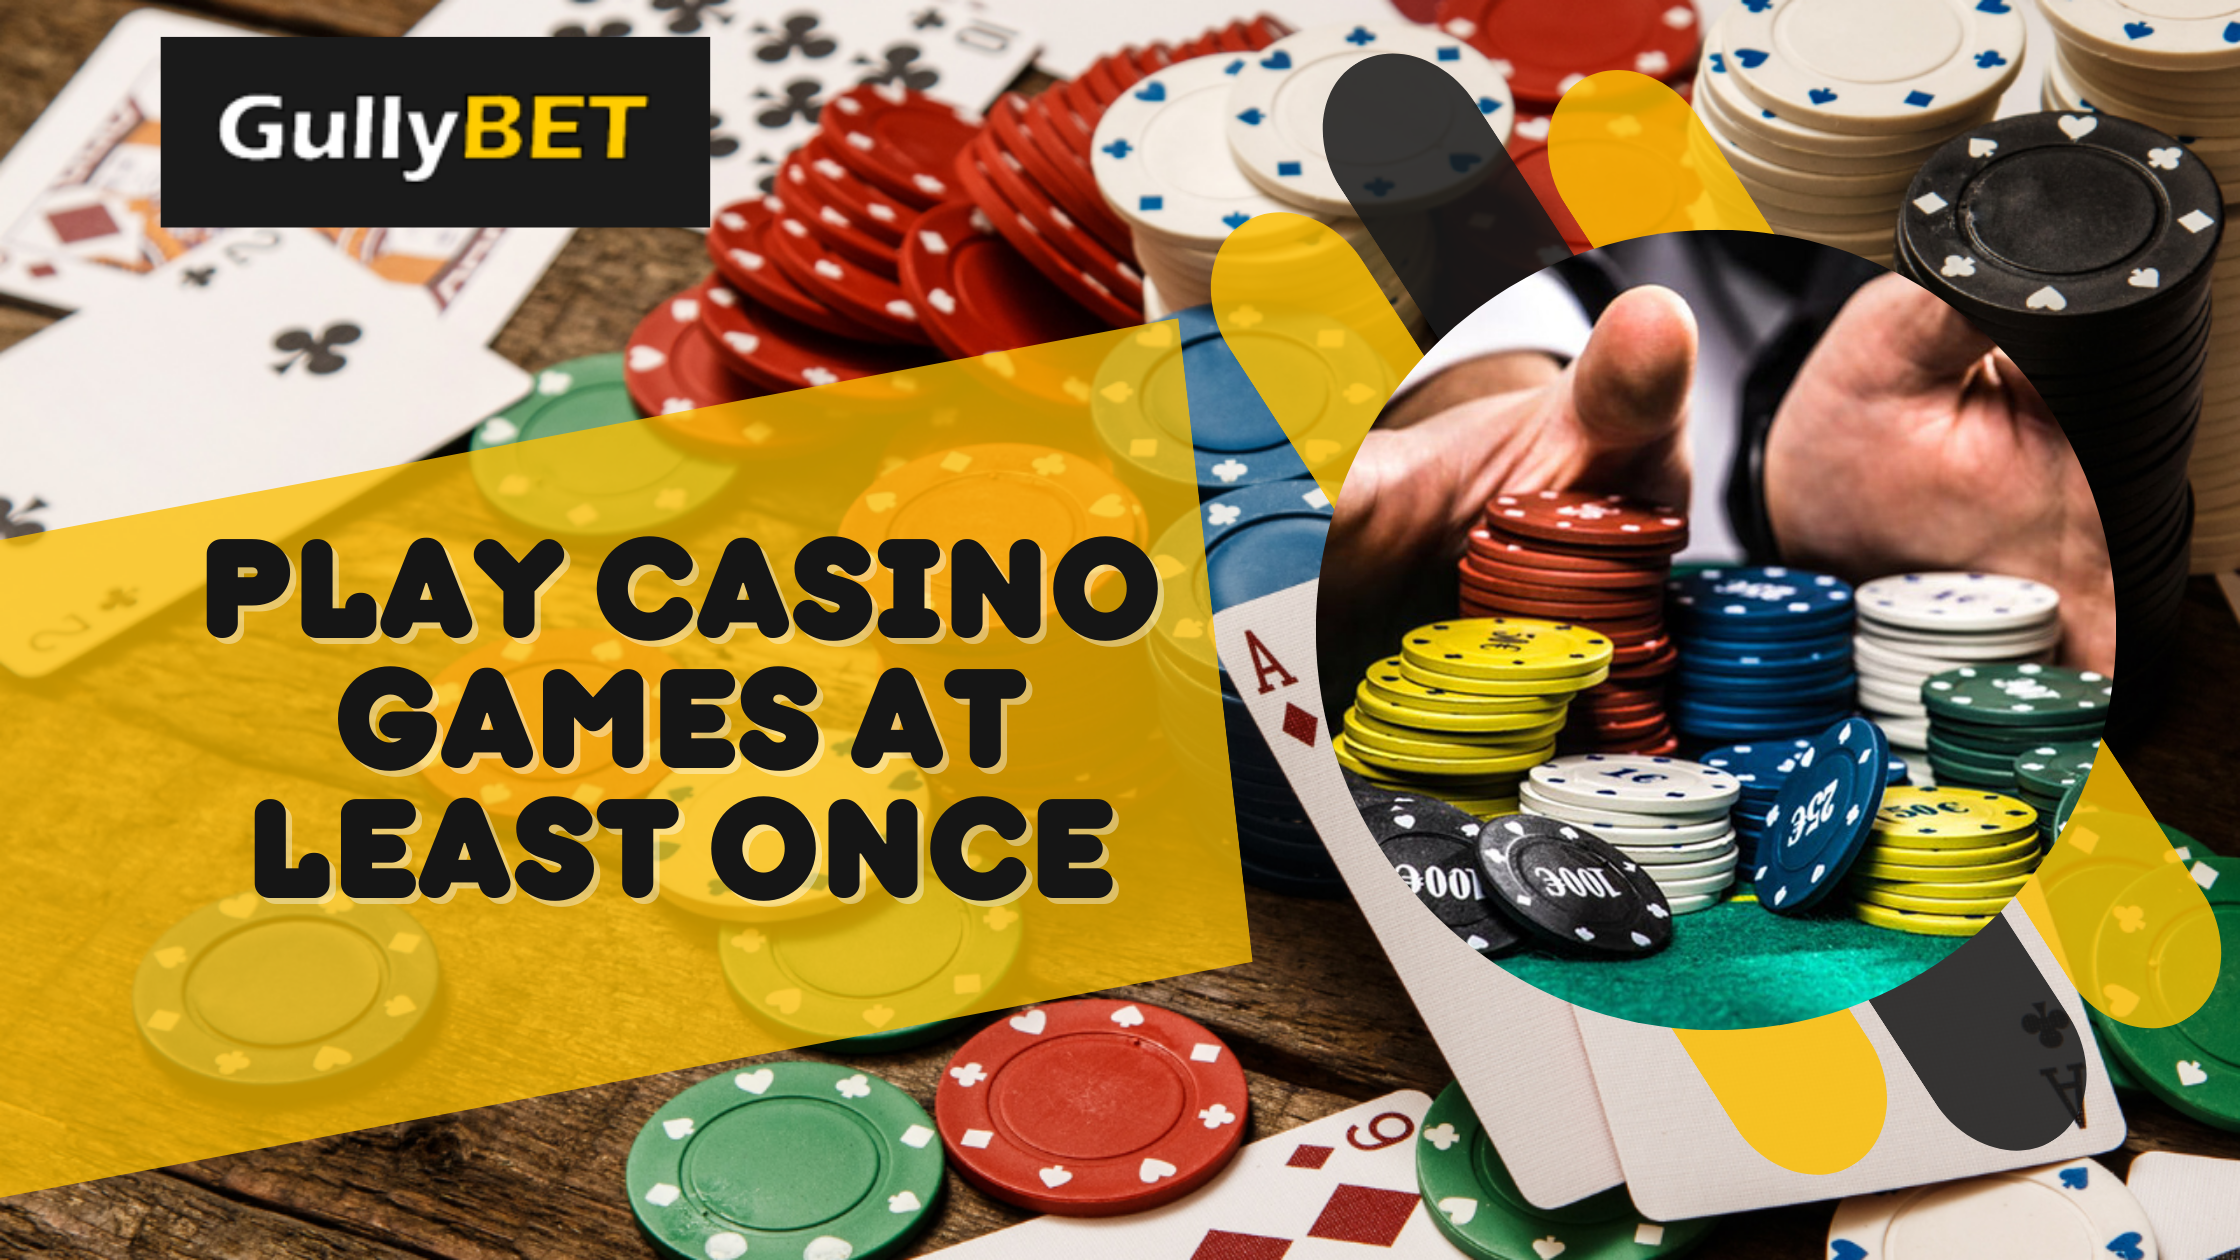 With GullyBET, You Should Try to Play Casino Games at Least Once